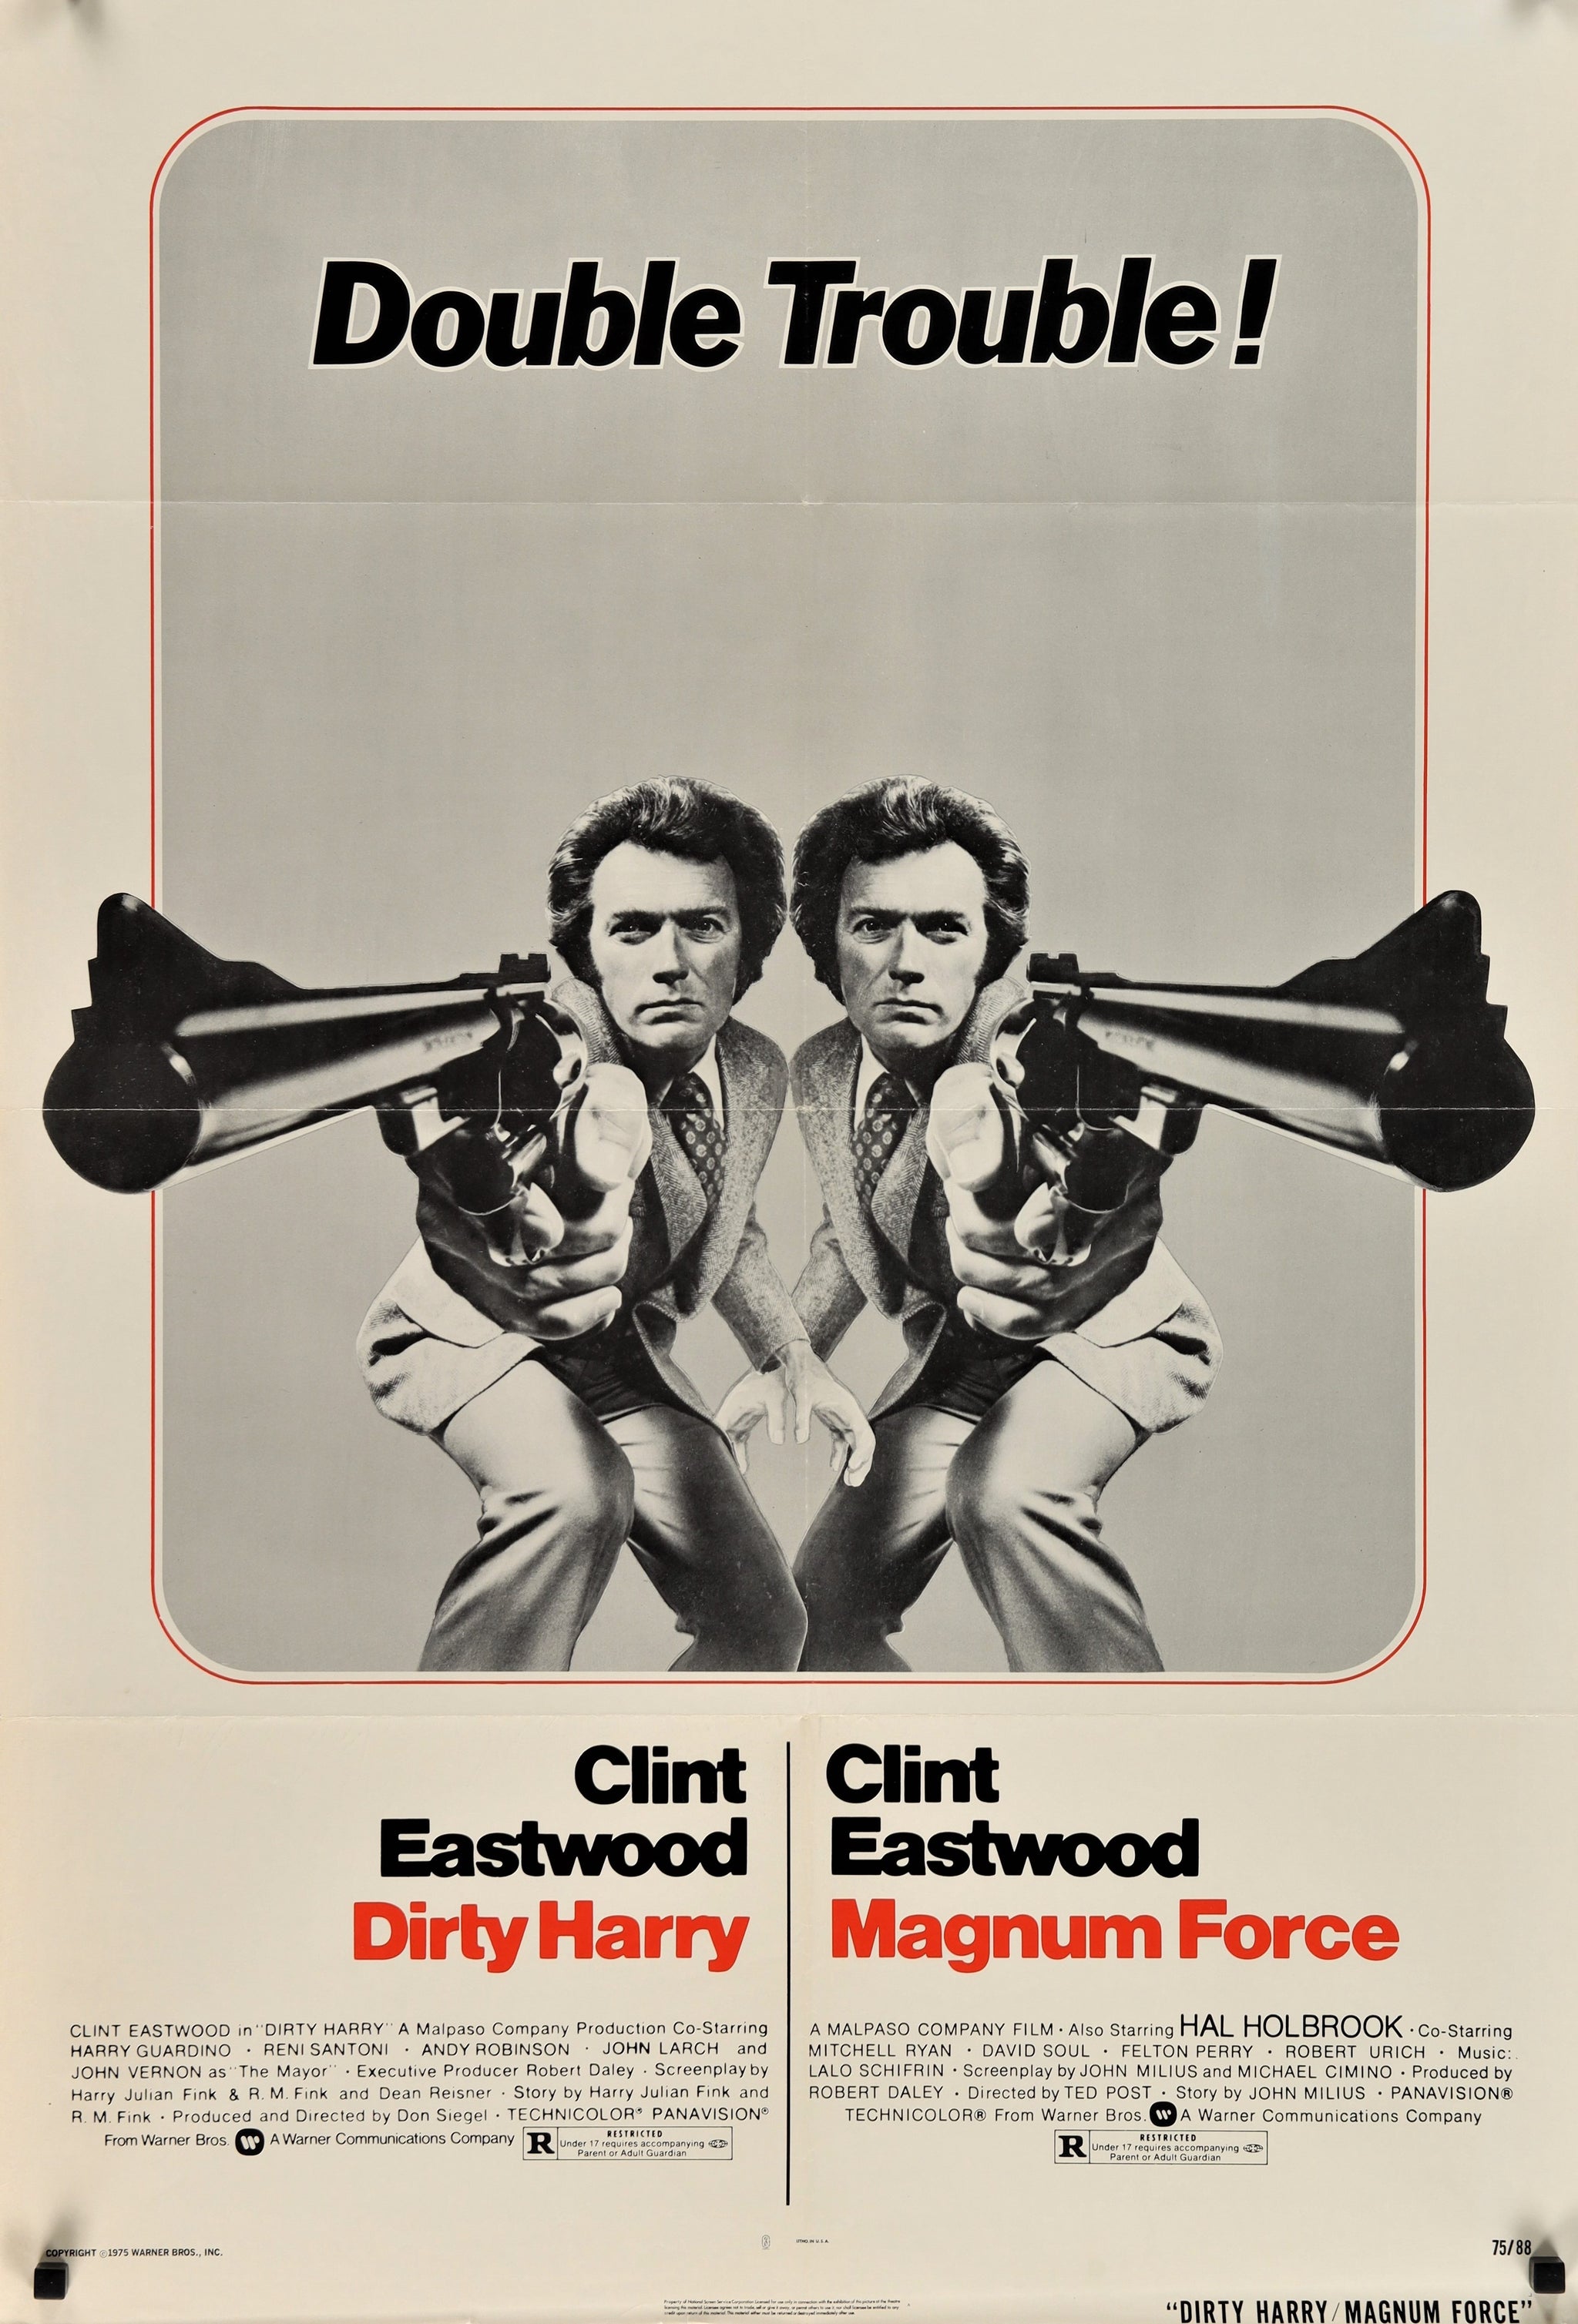 Clint Eastwood, Dirty Harry Movie Poster Fan Made Digital Download